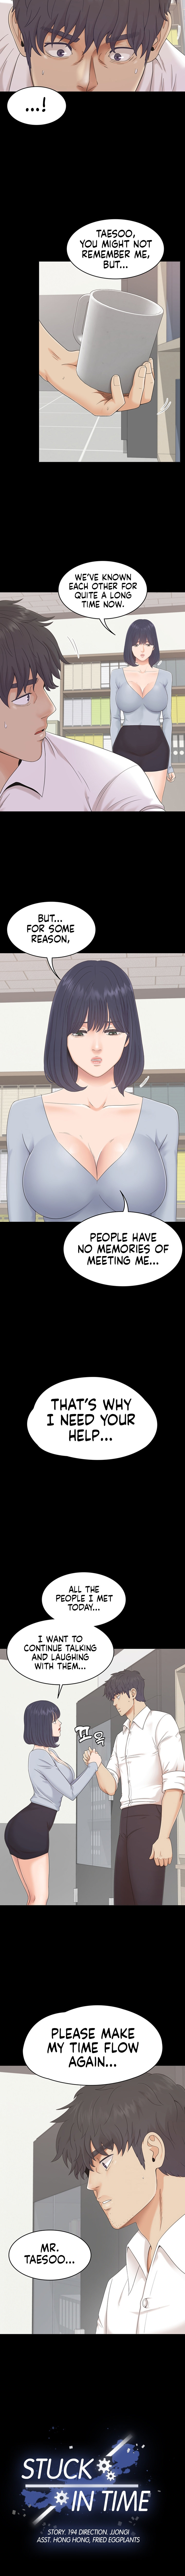 Stuck in Time - Chapter 2 Page 4